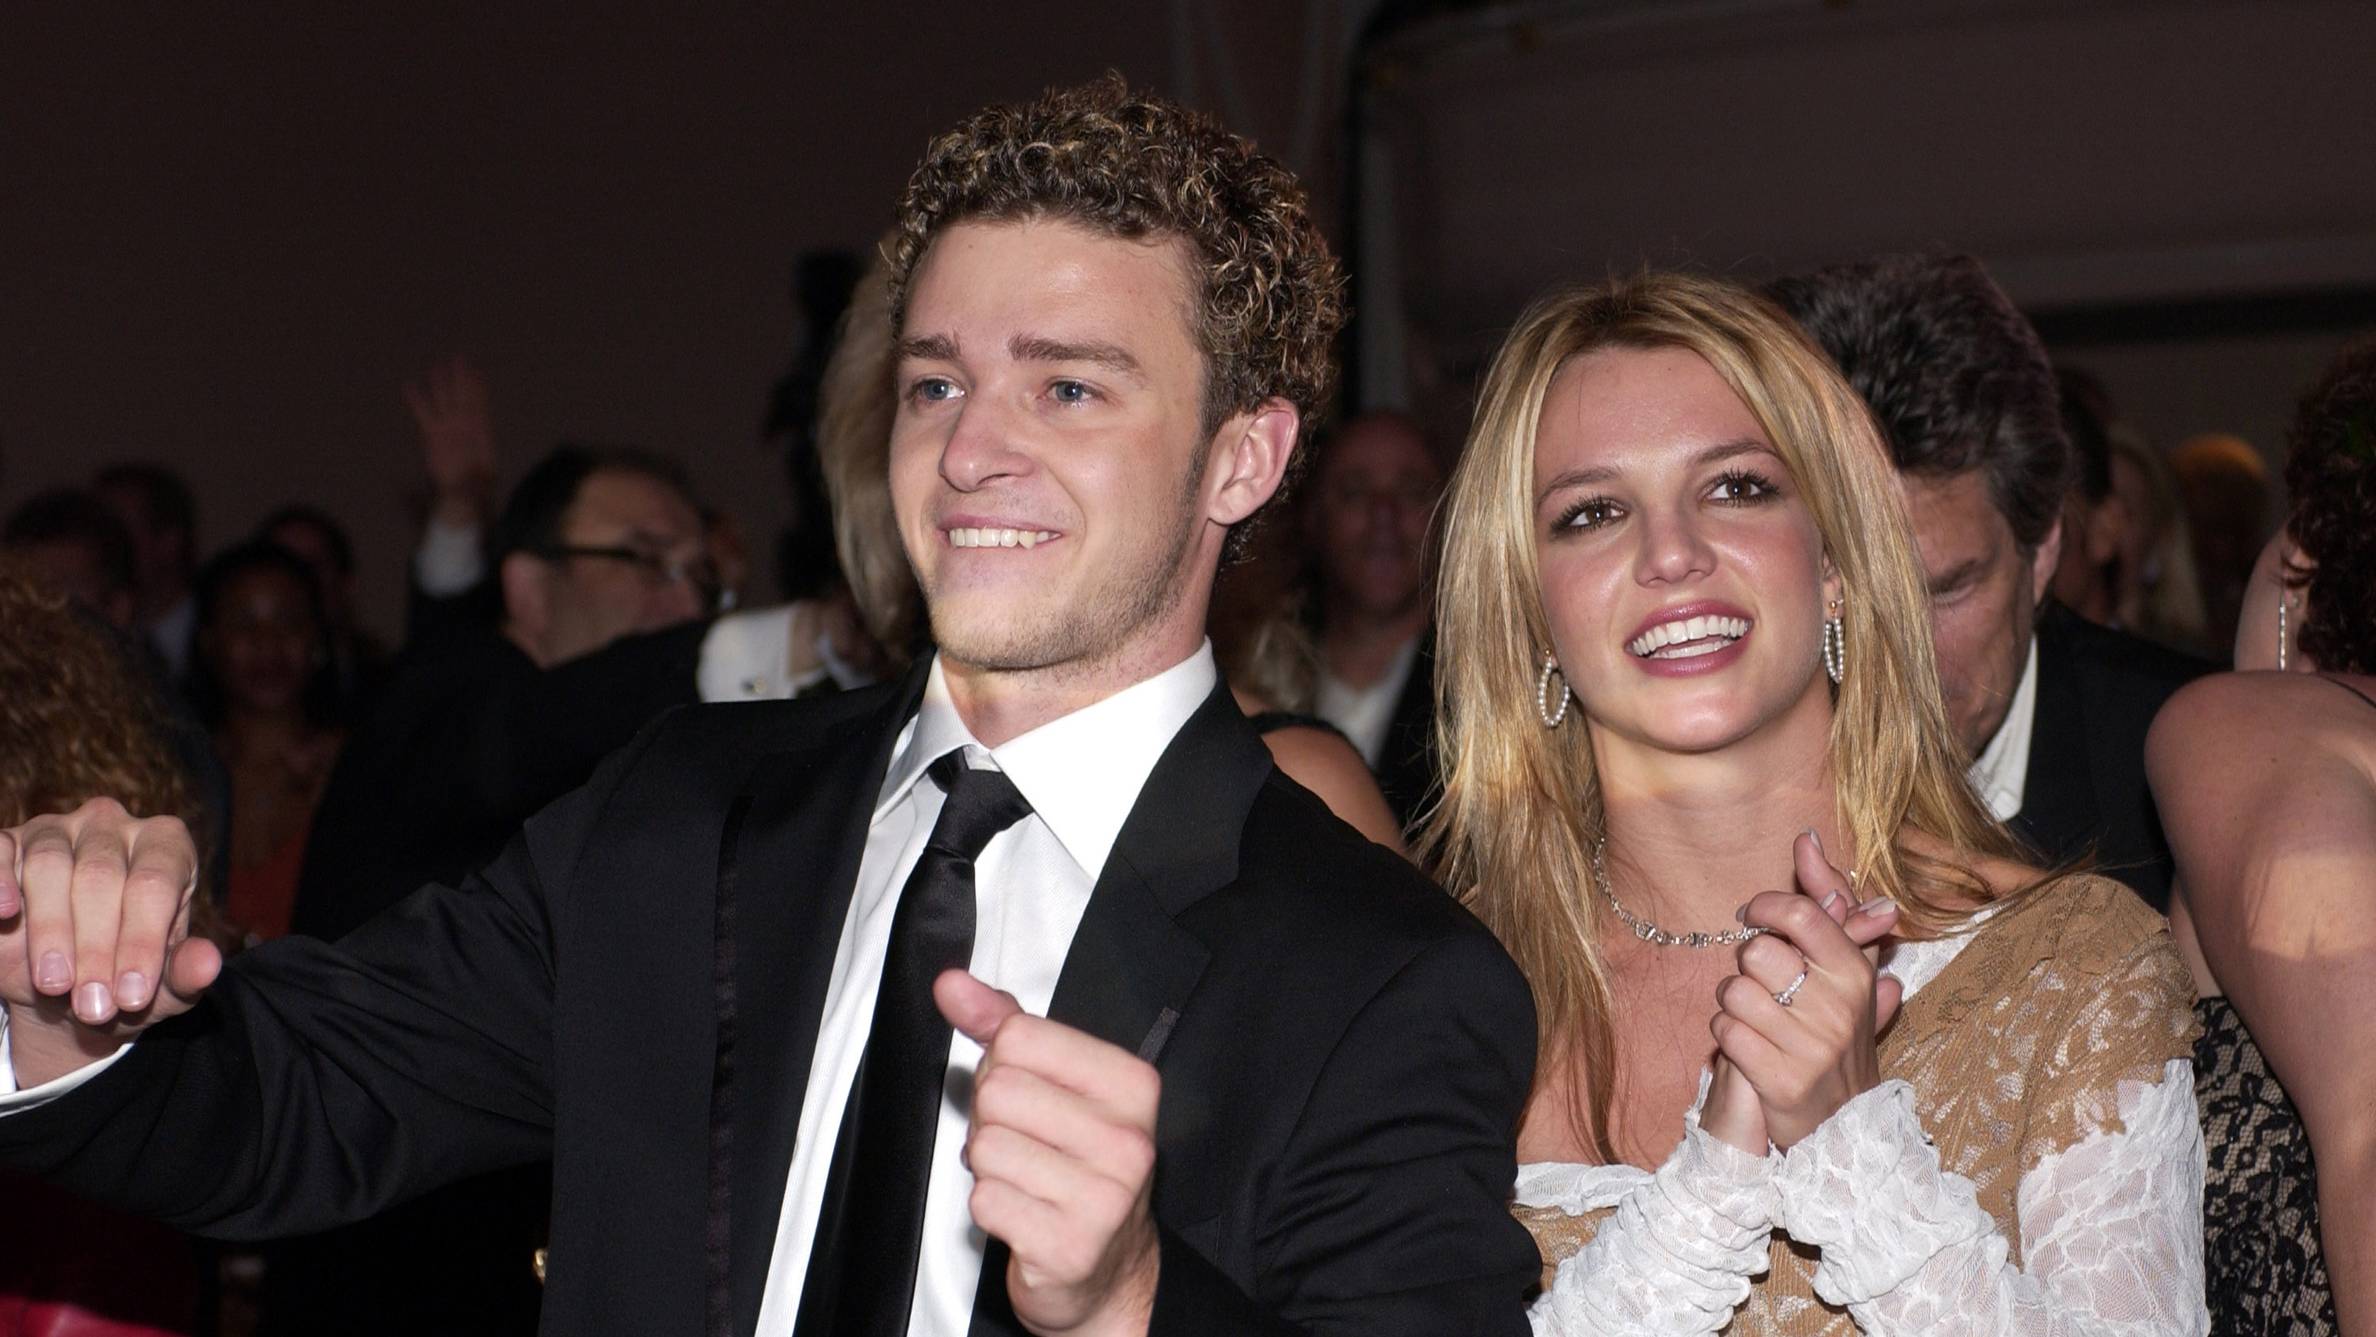 Britney Spears shakes a leg to song featuring ex-boyfriend Justin Timberlake